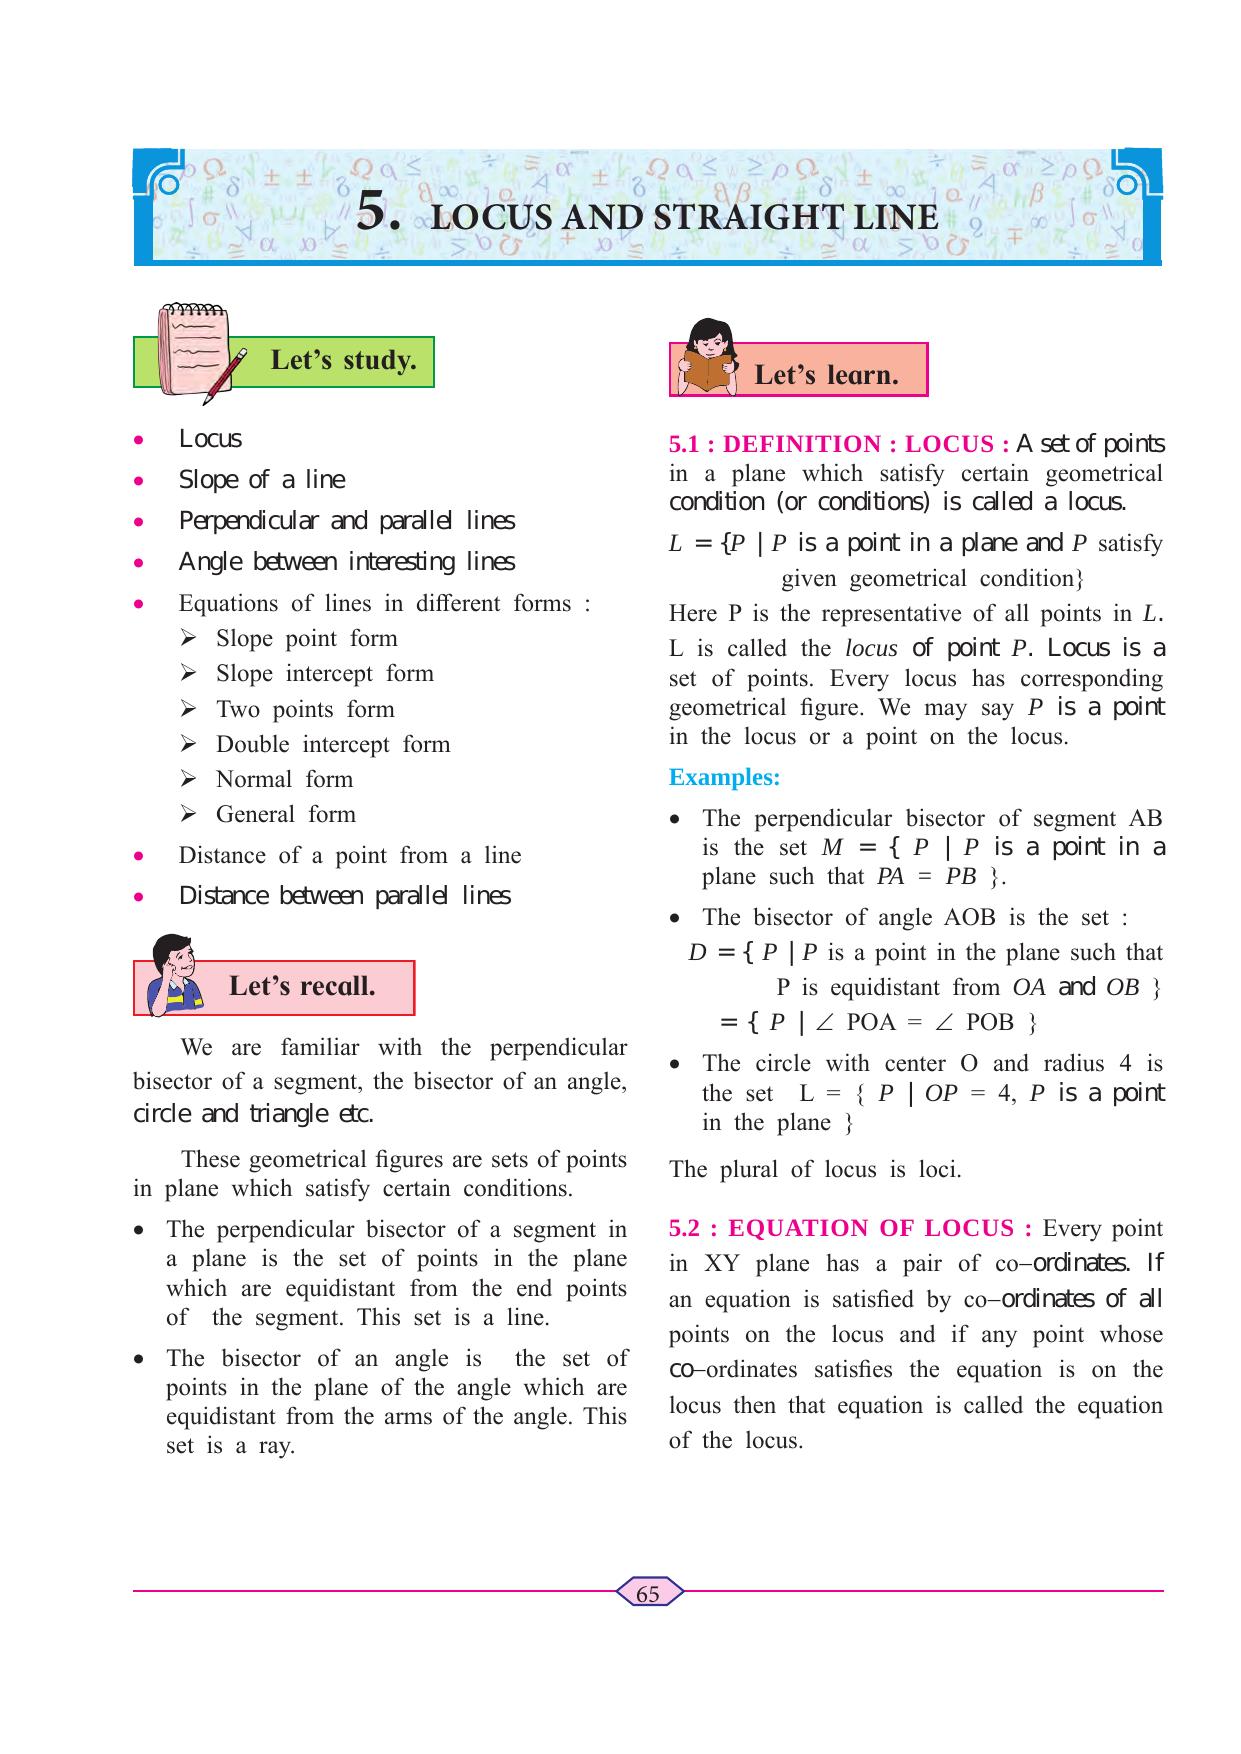 Maharashtra Board Class 11 Maths (Commerce) (Part 1) Textbook - Page 75